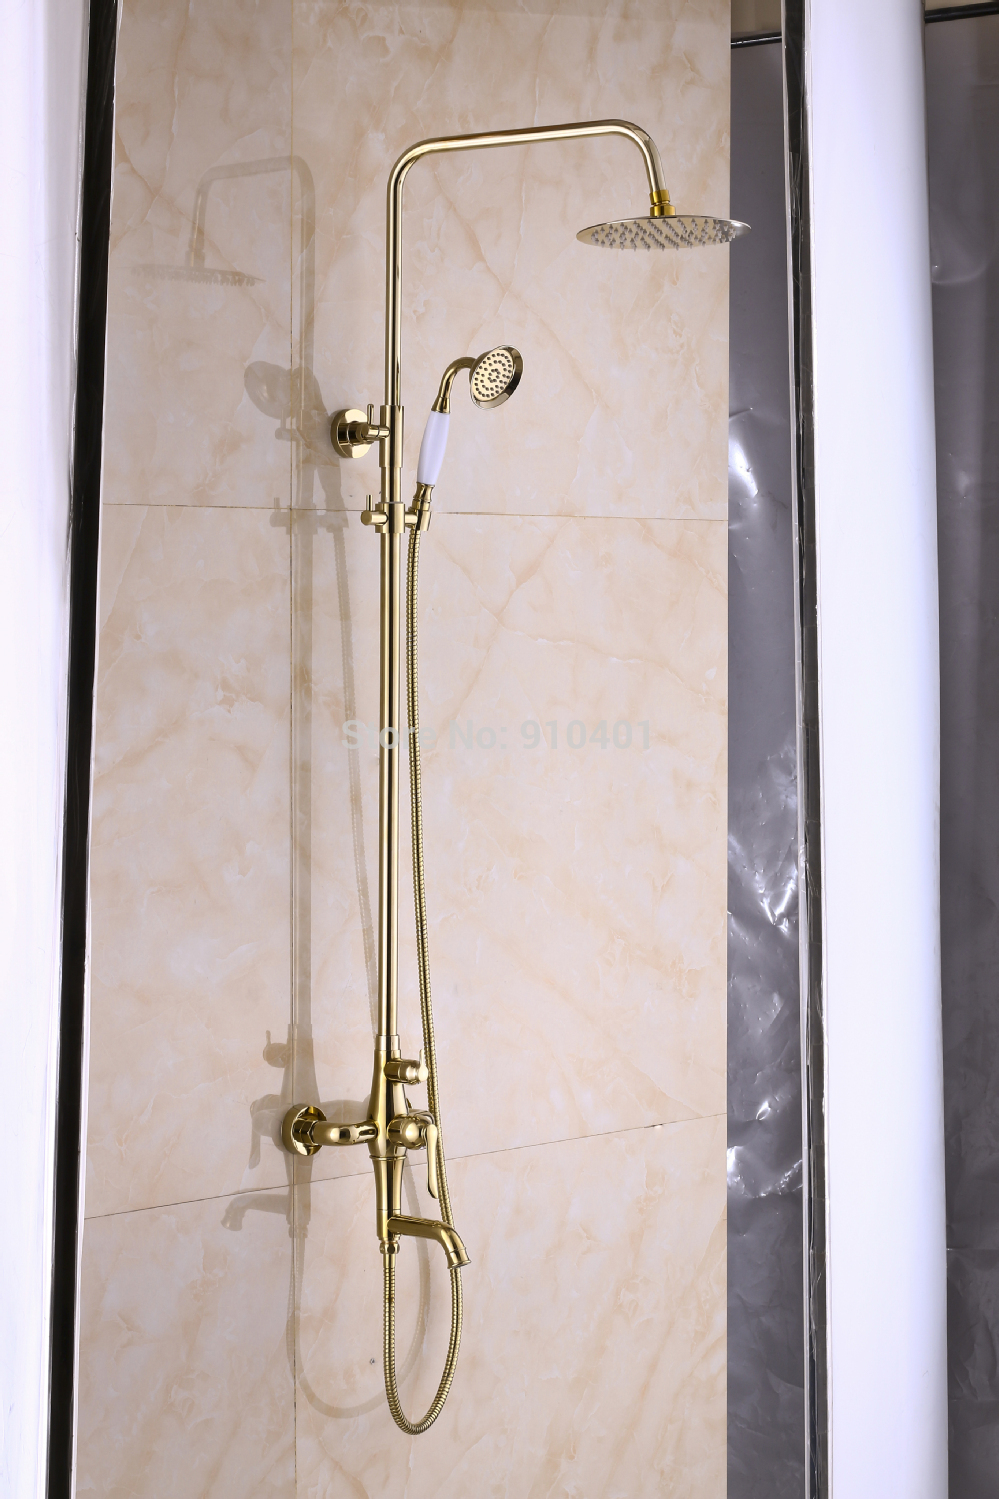 Wholesale And Retail Promotion Golden Exposed Shower Column Rain Shower Mixer Tap Single Handle Tub Mixer Tap